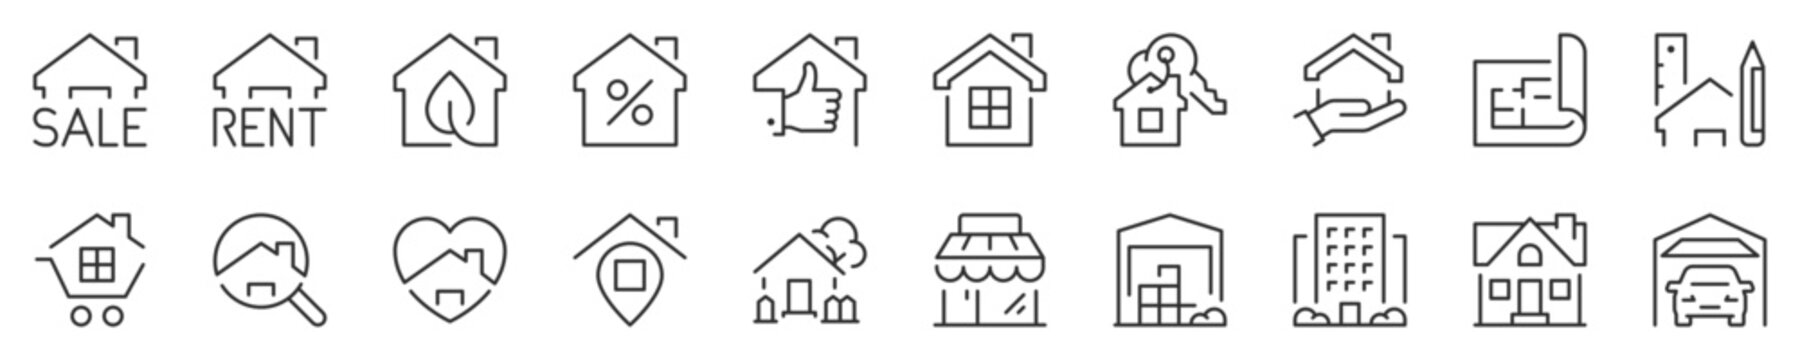 houses and real estate services thin line icon set 1 of 2. symbol collection in transparent backgrou